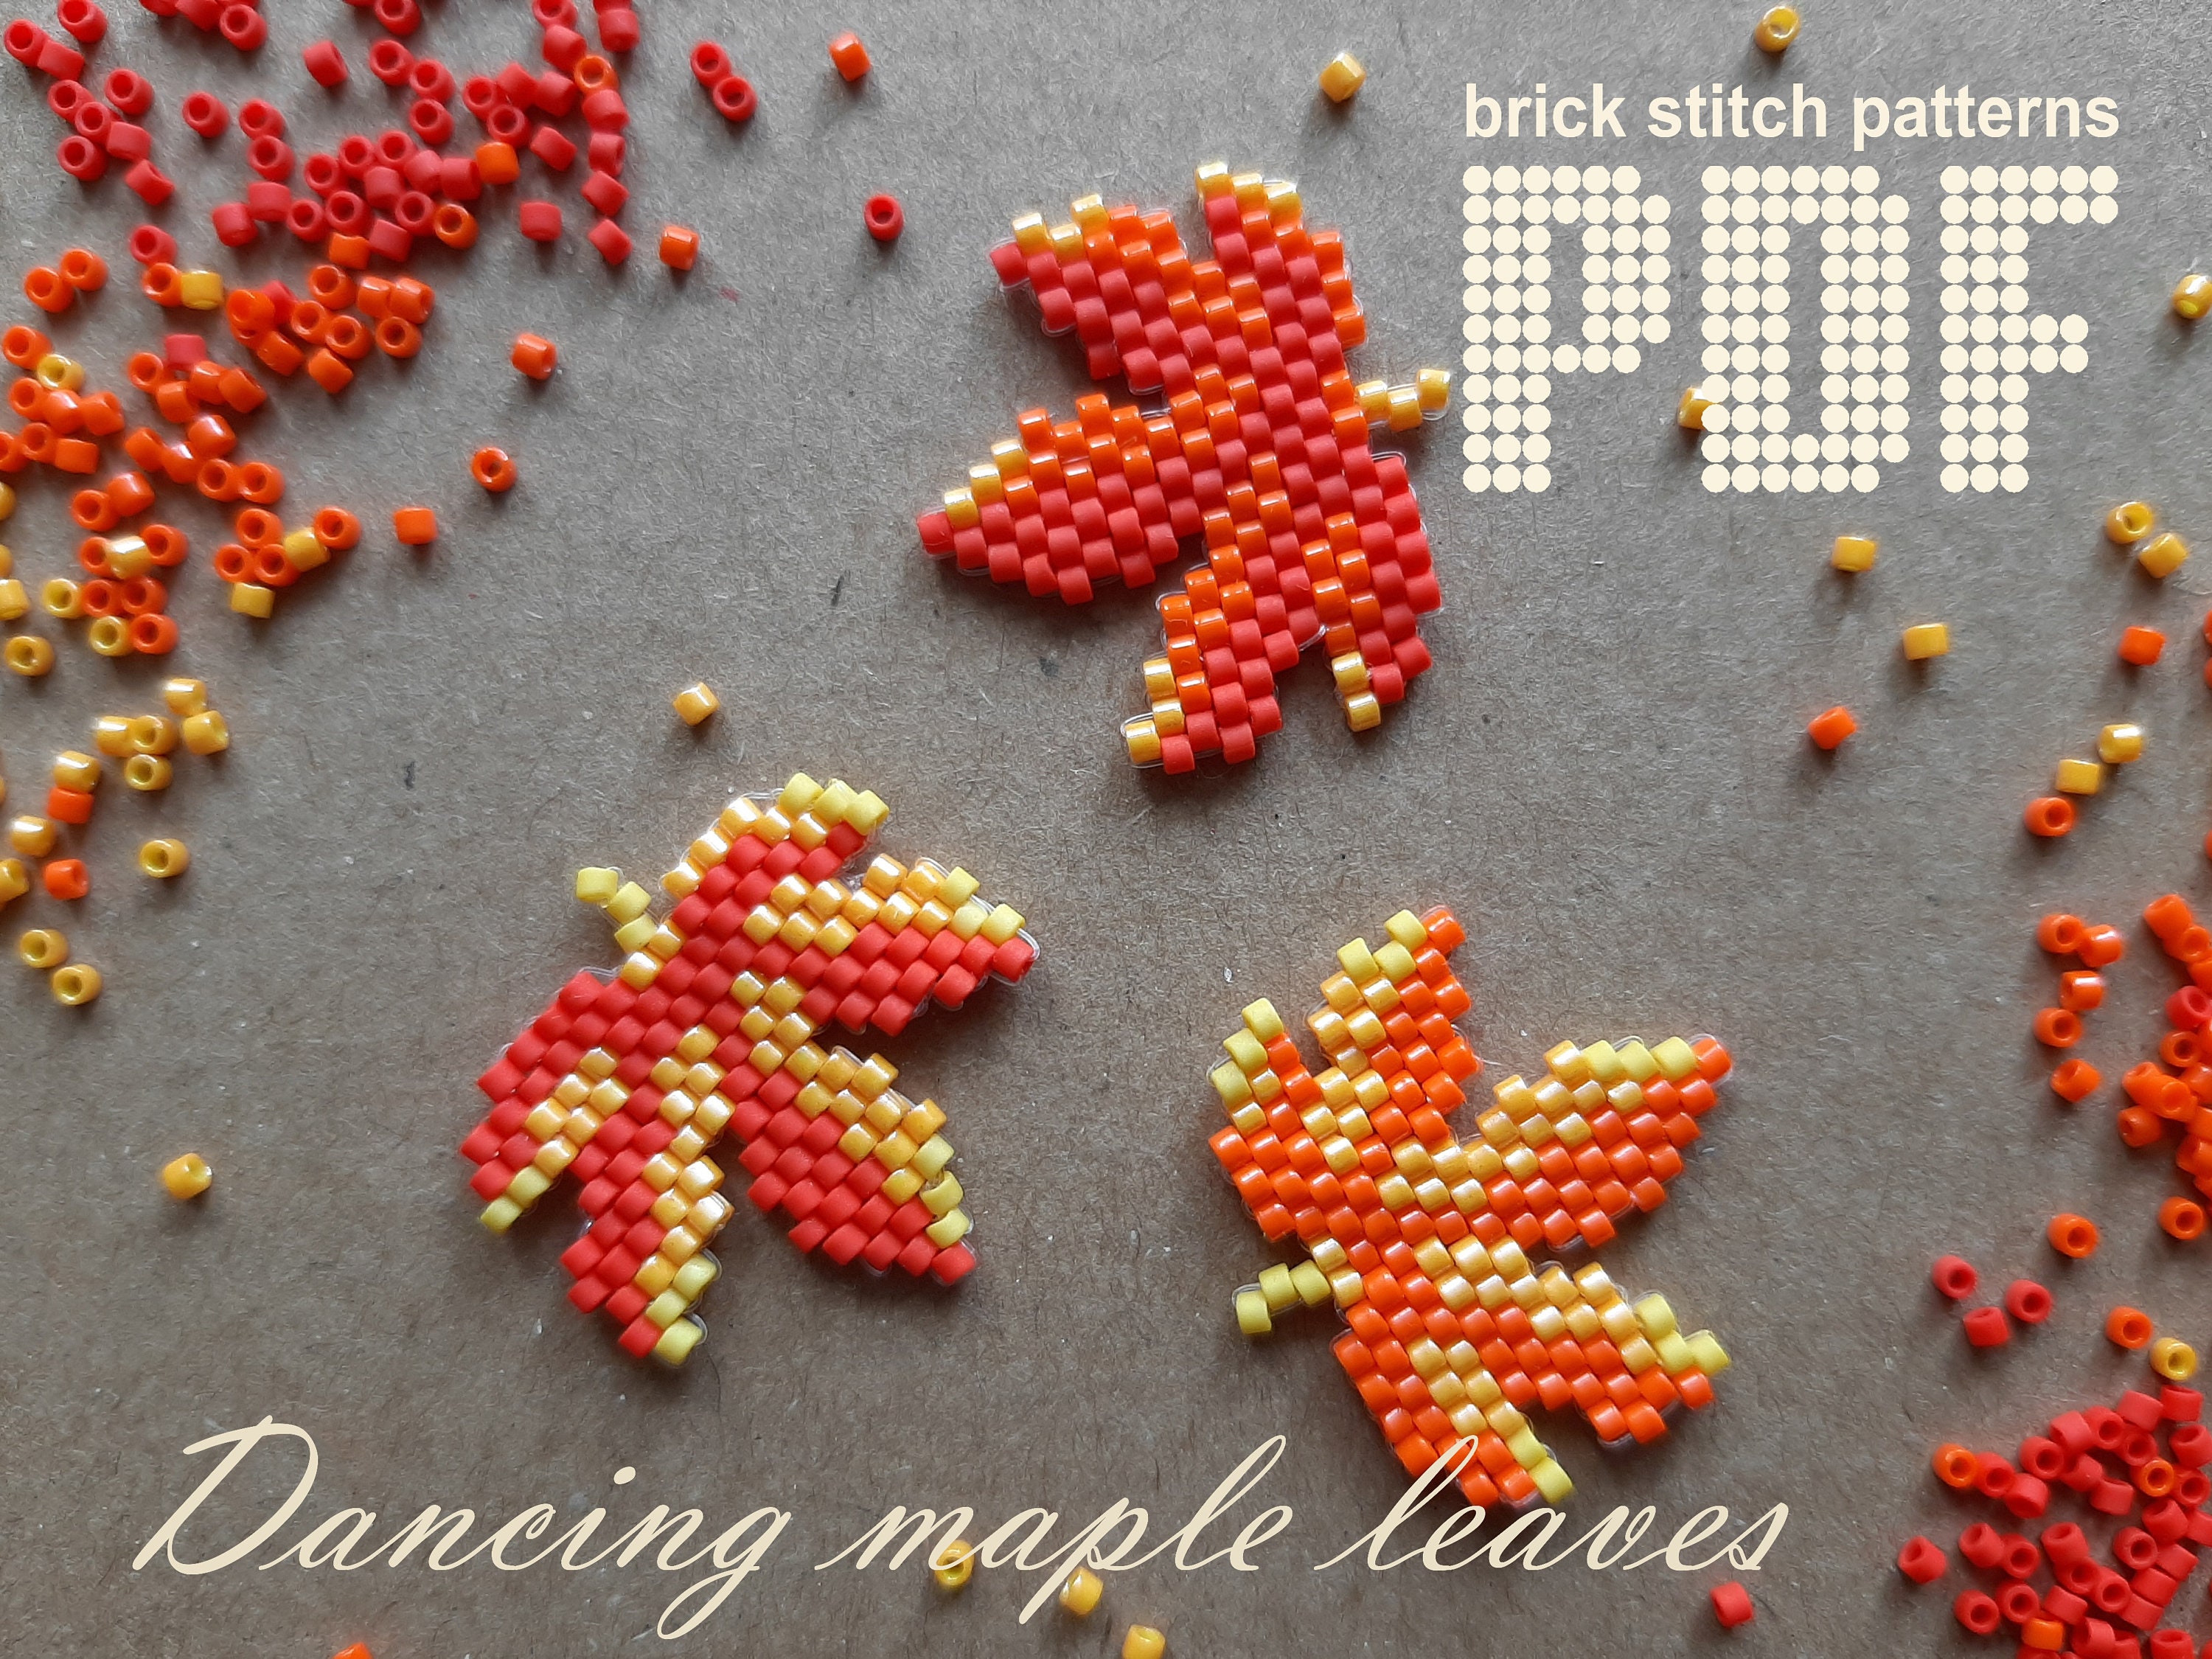 BEAD PACK, With Beads & Fabric: Autumn Leaves Hand Bead Embroidery 